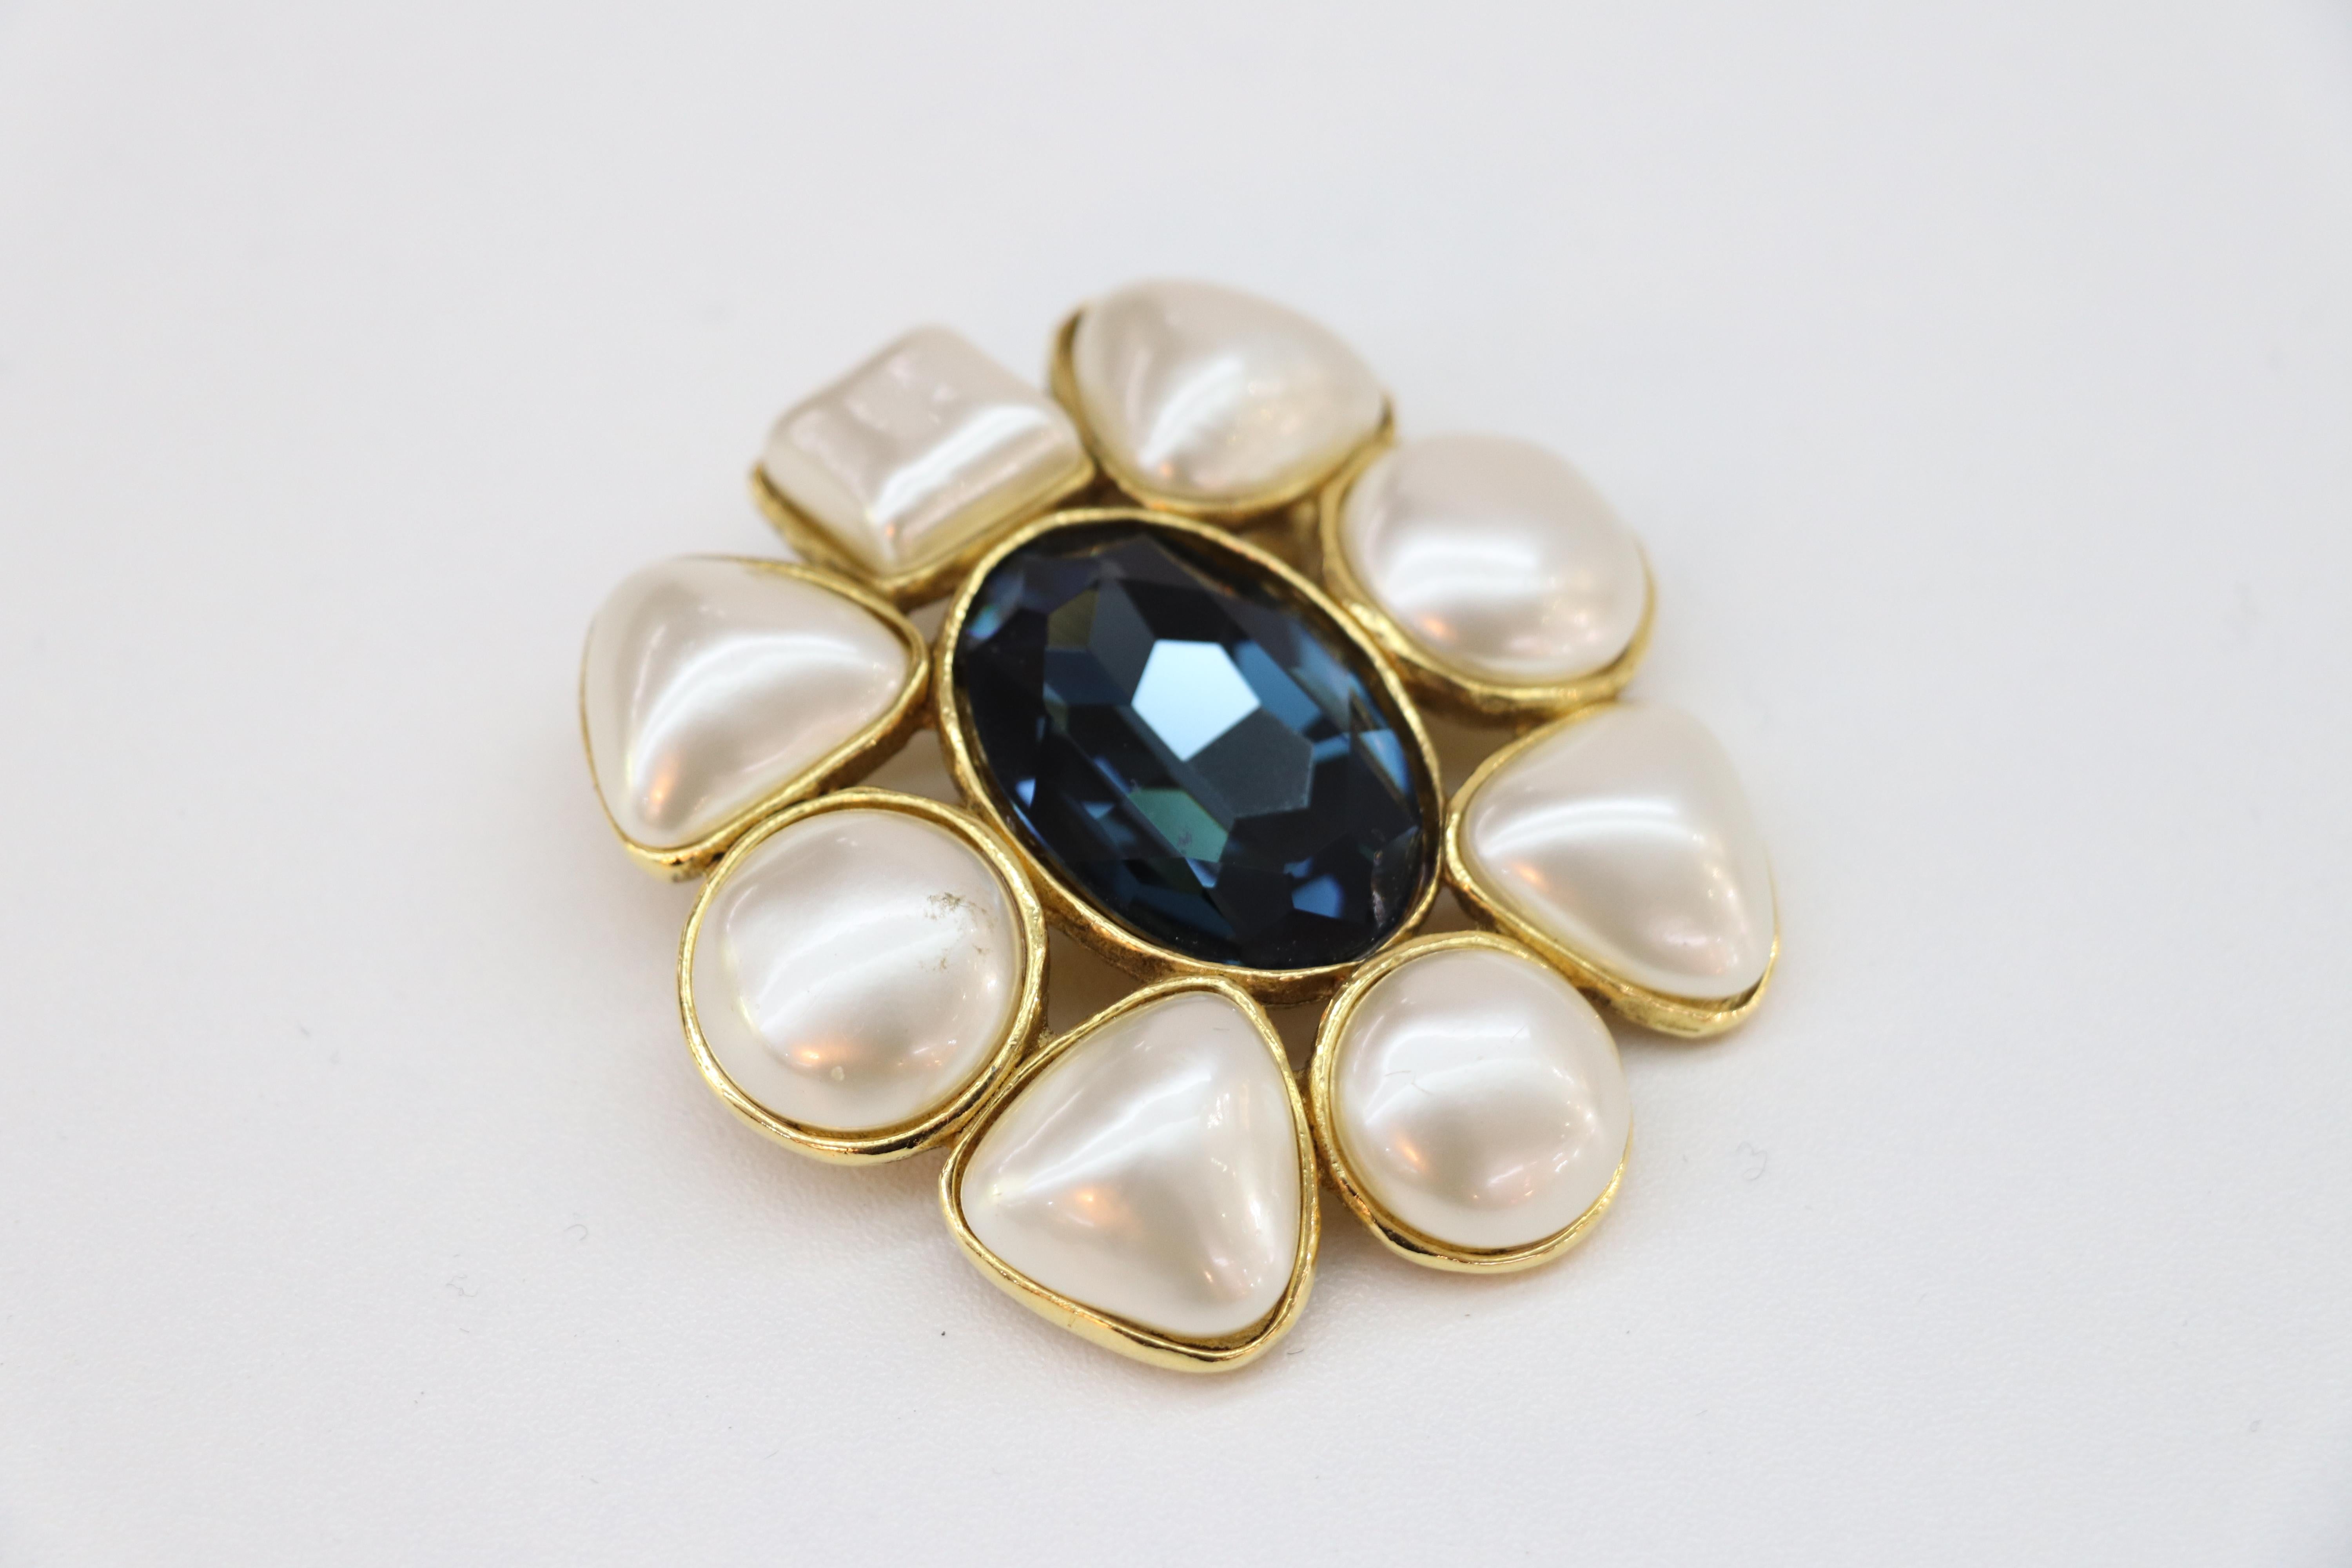 Chanel vintage flower brooch, dating to the 1980's, showcases 24k gold plating with eight faux pearls in varying shapes and sizes, with a blue oval center stone. This stunning piece has a secure lock pin backing and looks fabulous on any blazer or